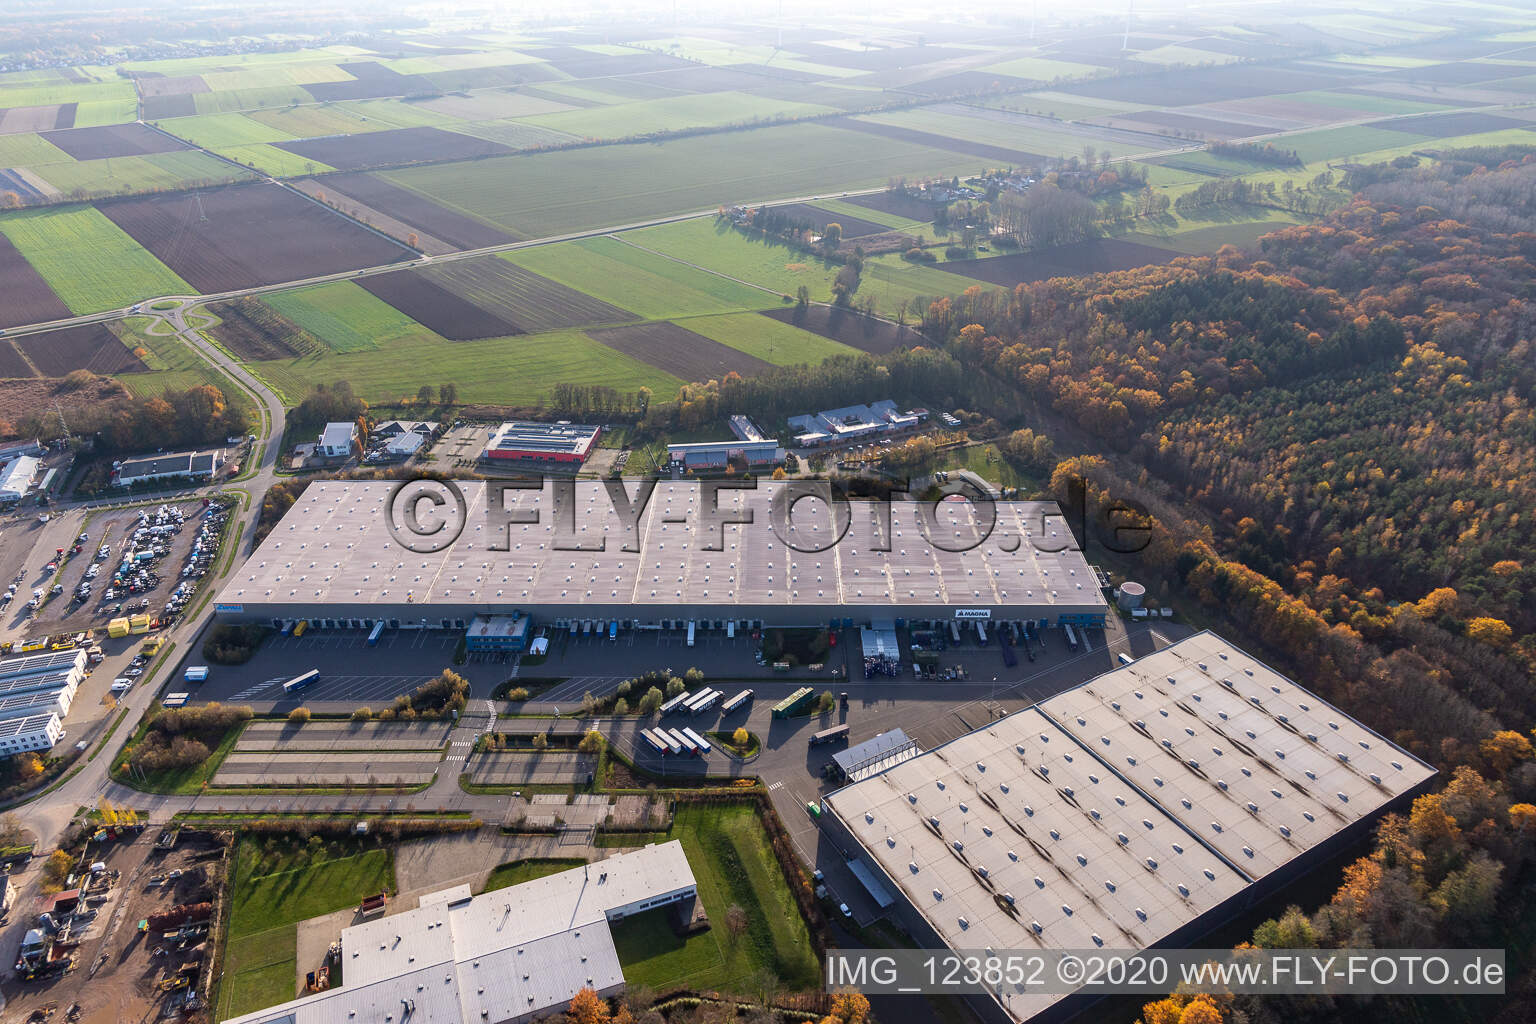 Horst commercial area with Magna Exteriors, Random Logistics, STS Group and Thermo Fisher in the district Minderslachen in Kandel in the state Rhineland-Palatinate, Germany from the drone perspective